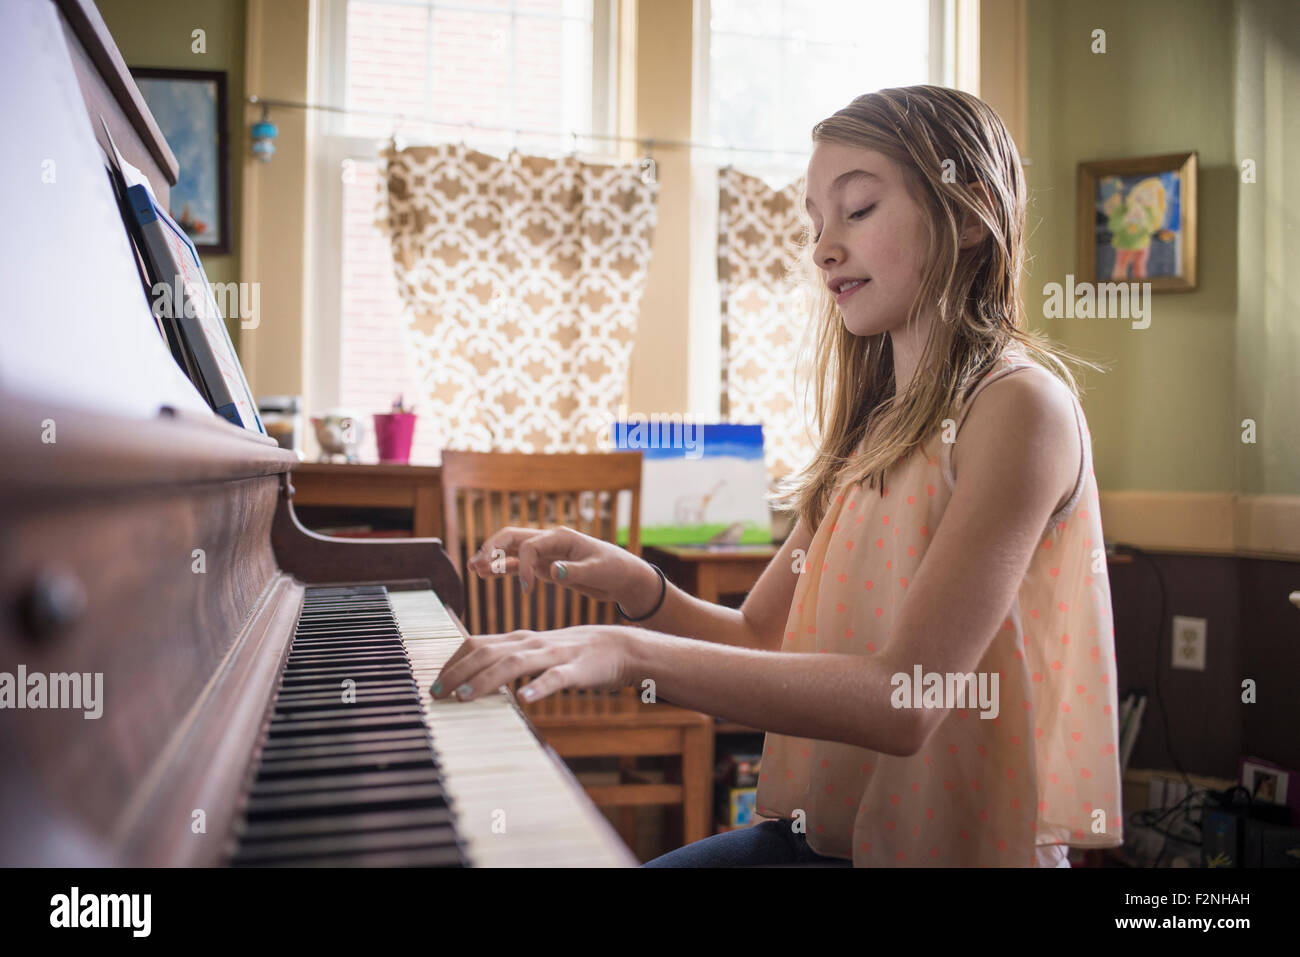 Caucasian girl playing piano in living room Stock Photo